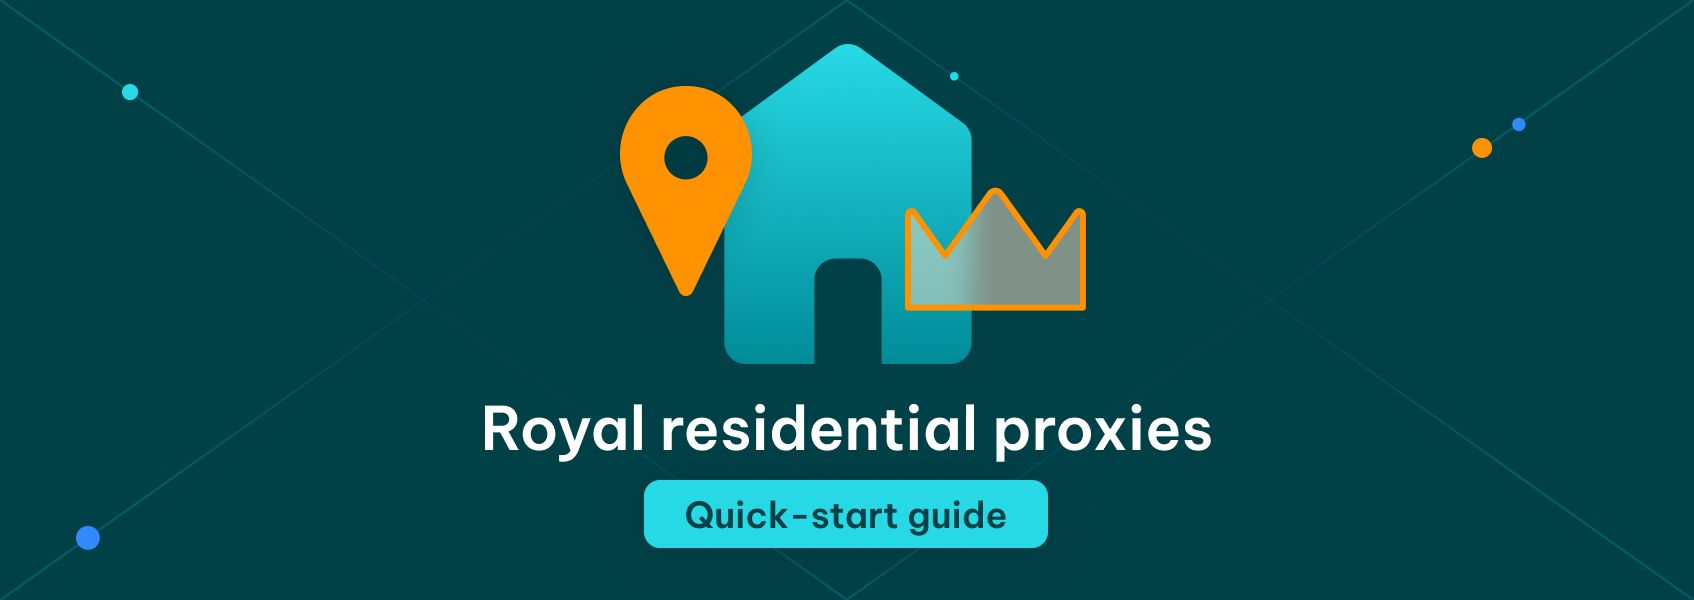 Residential Proxies Quick-Start Guide